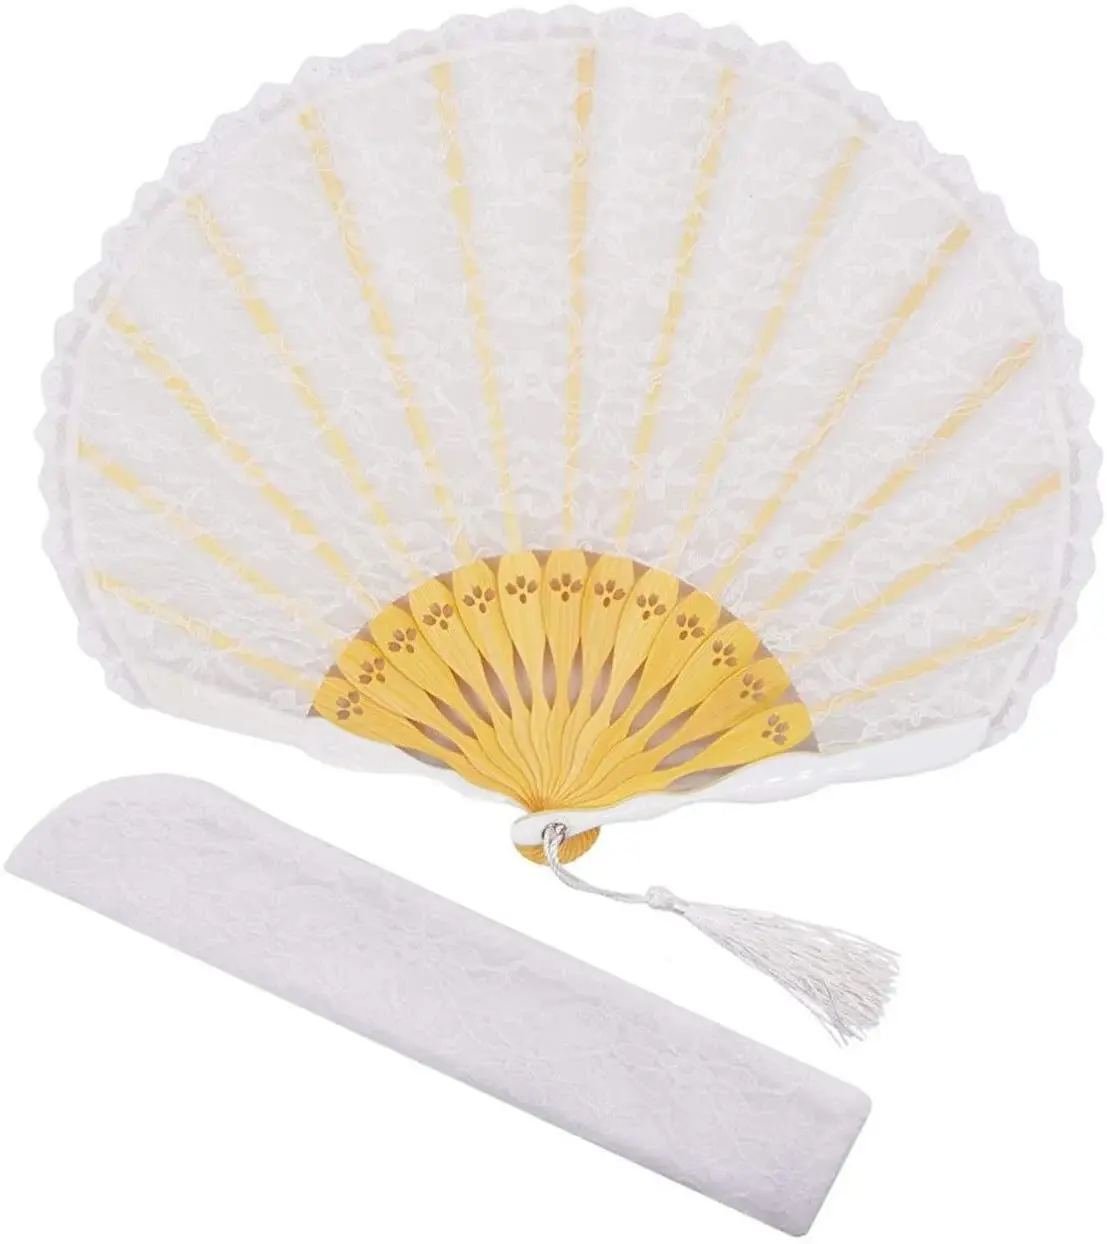 Personalized Small Bamboo White Lace Hand Foldable Held Fans Bulk Gift Decoration Large Bamboo Fan